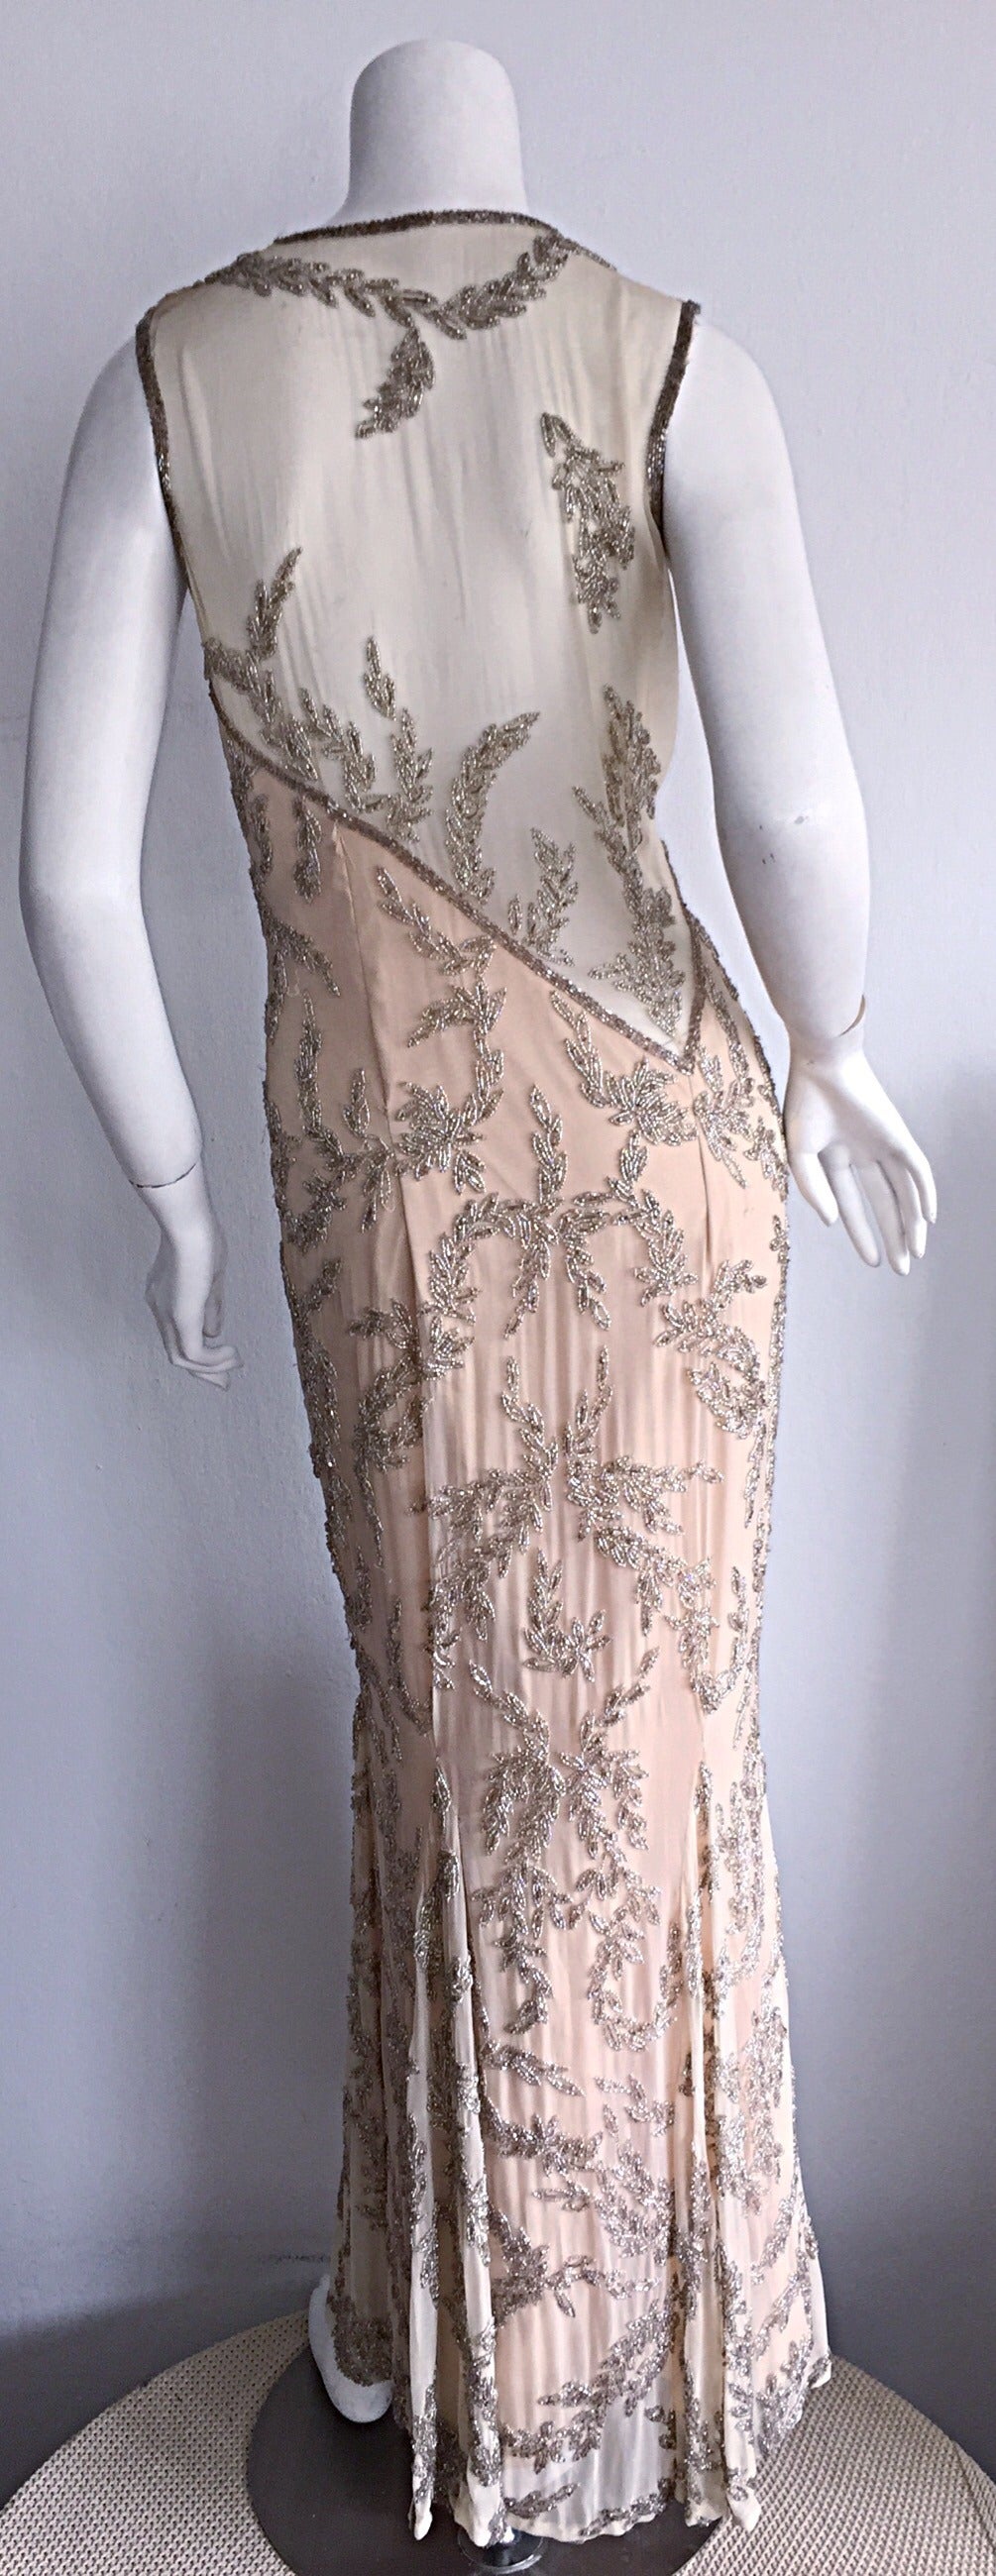 Simply stunning vintage nude illusion heavily beaded silk custom made dress! Layers of nude silk chiffon, with intricate beading detail throughout. Asymmetrical back, that is just so amazing on! Slight mermaid hem. There is so much expert tailoring